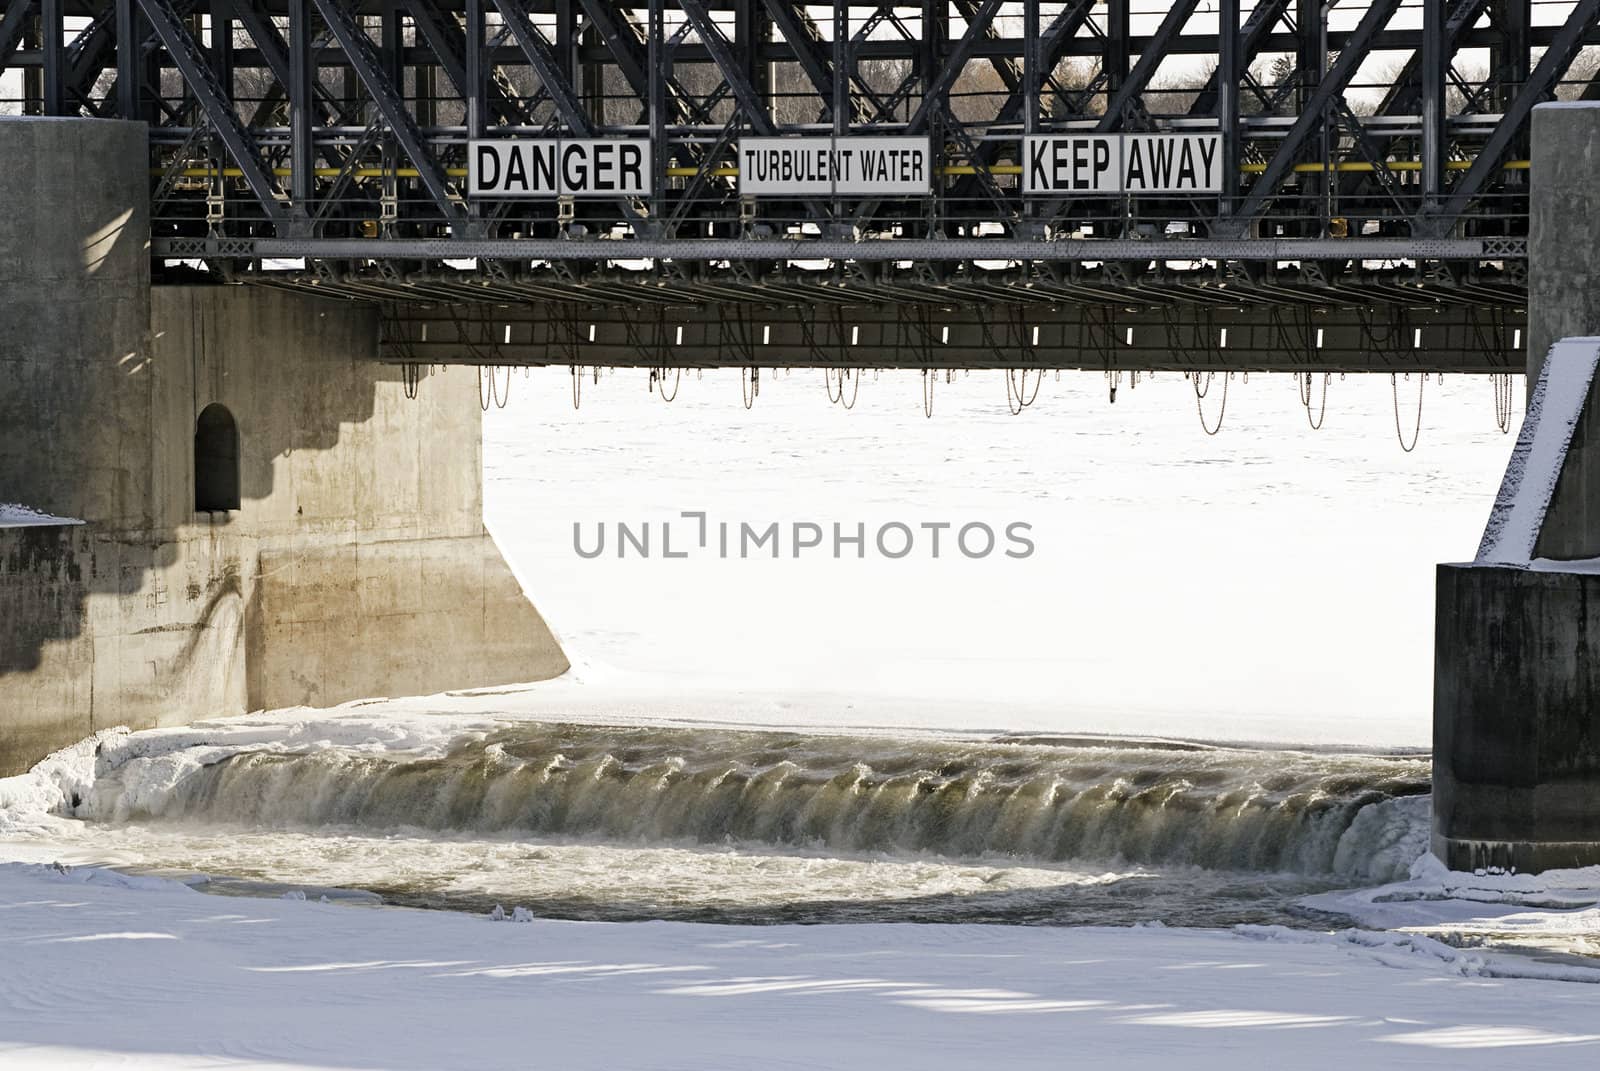 Close-up view of a open dam in the winter with dangerous and turbulent waters.